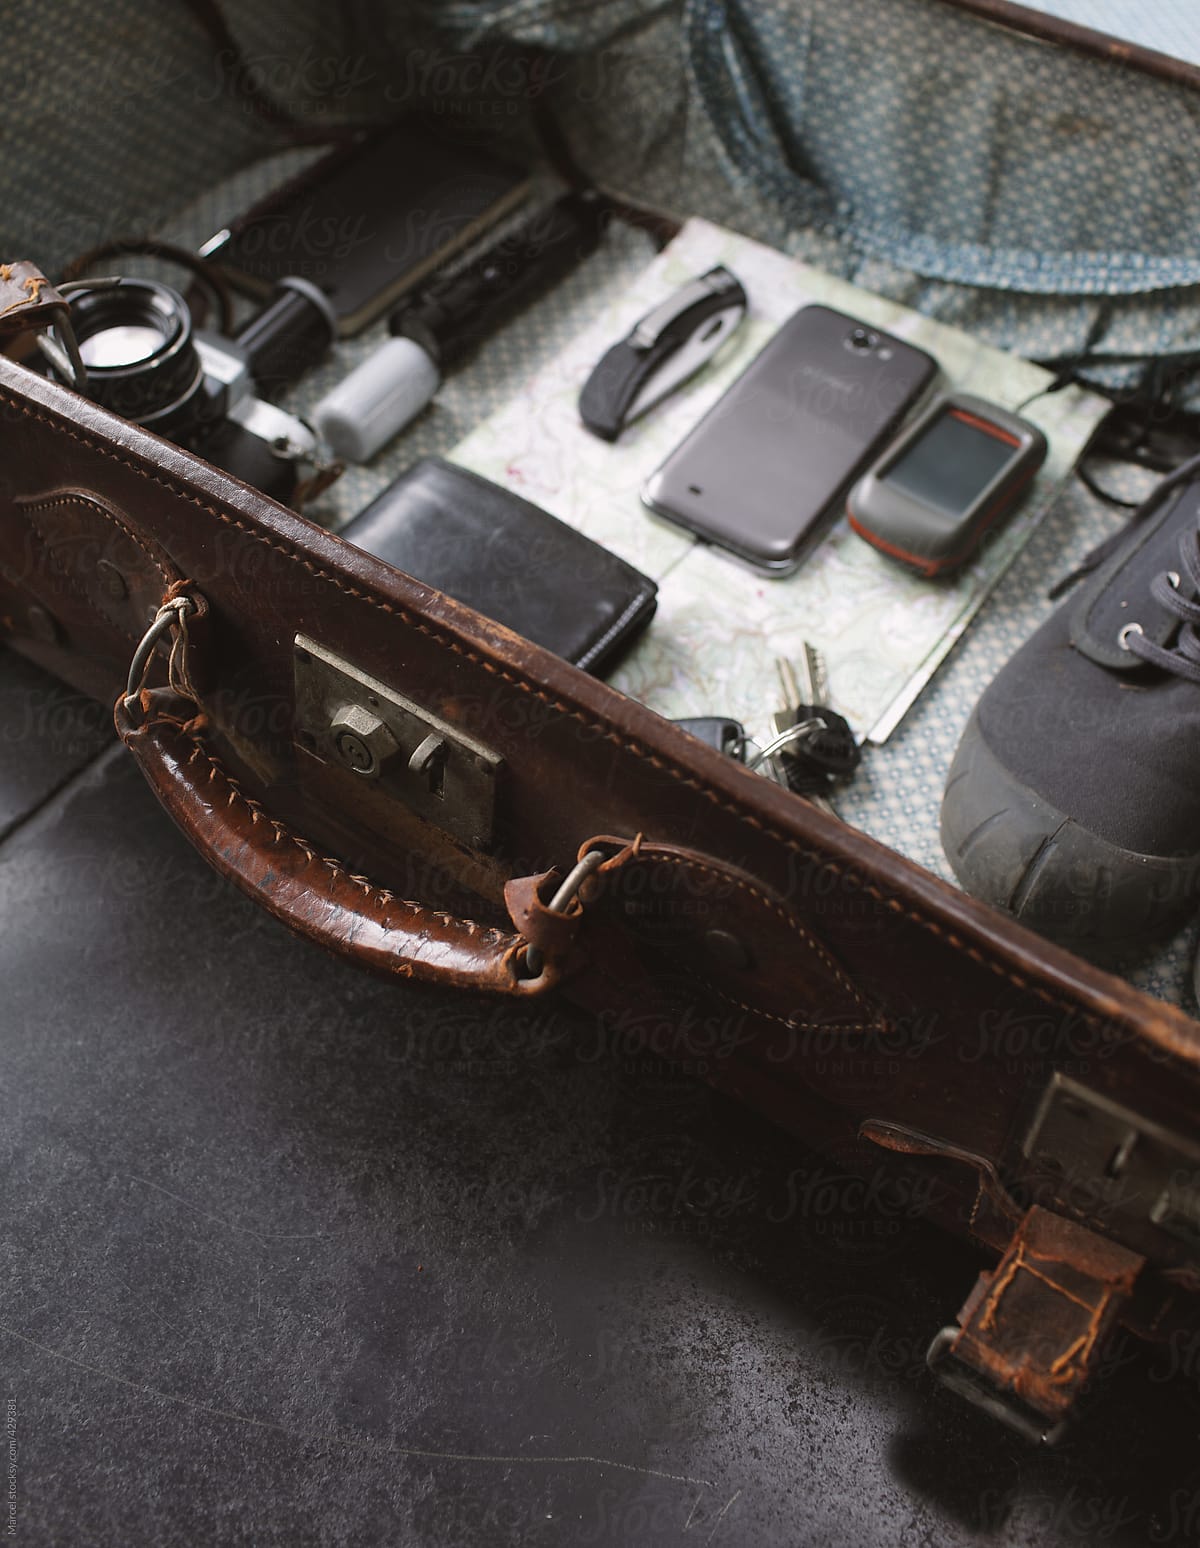 Old leather suitcase packed with travel gear